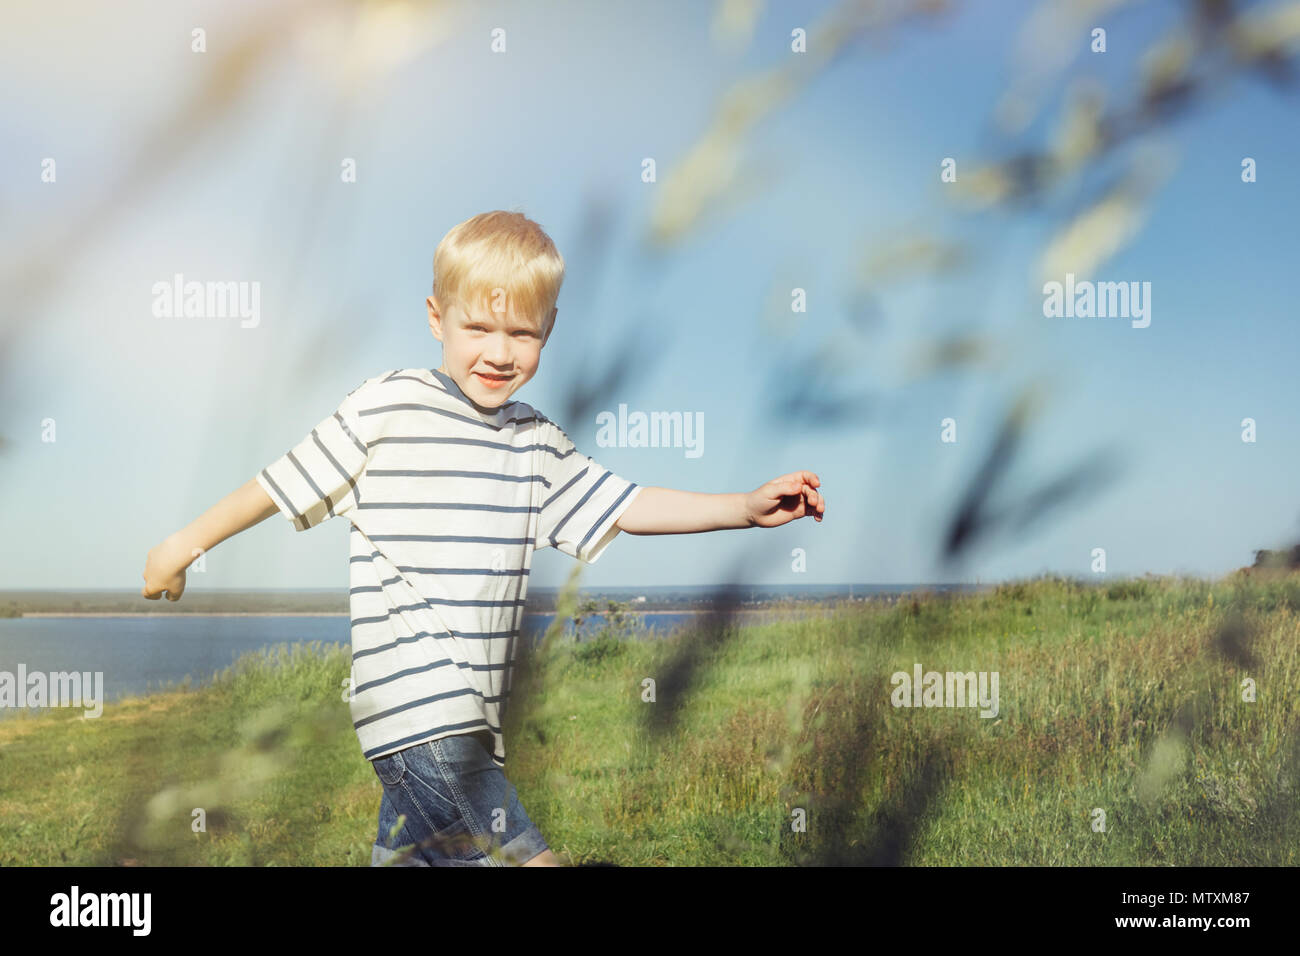 Blond boy joyful and running on nature. Field with high grass. Conceptual realism. Stock Photo